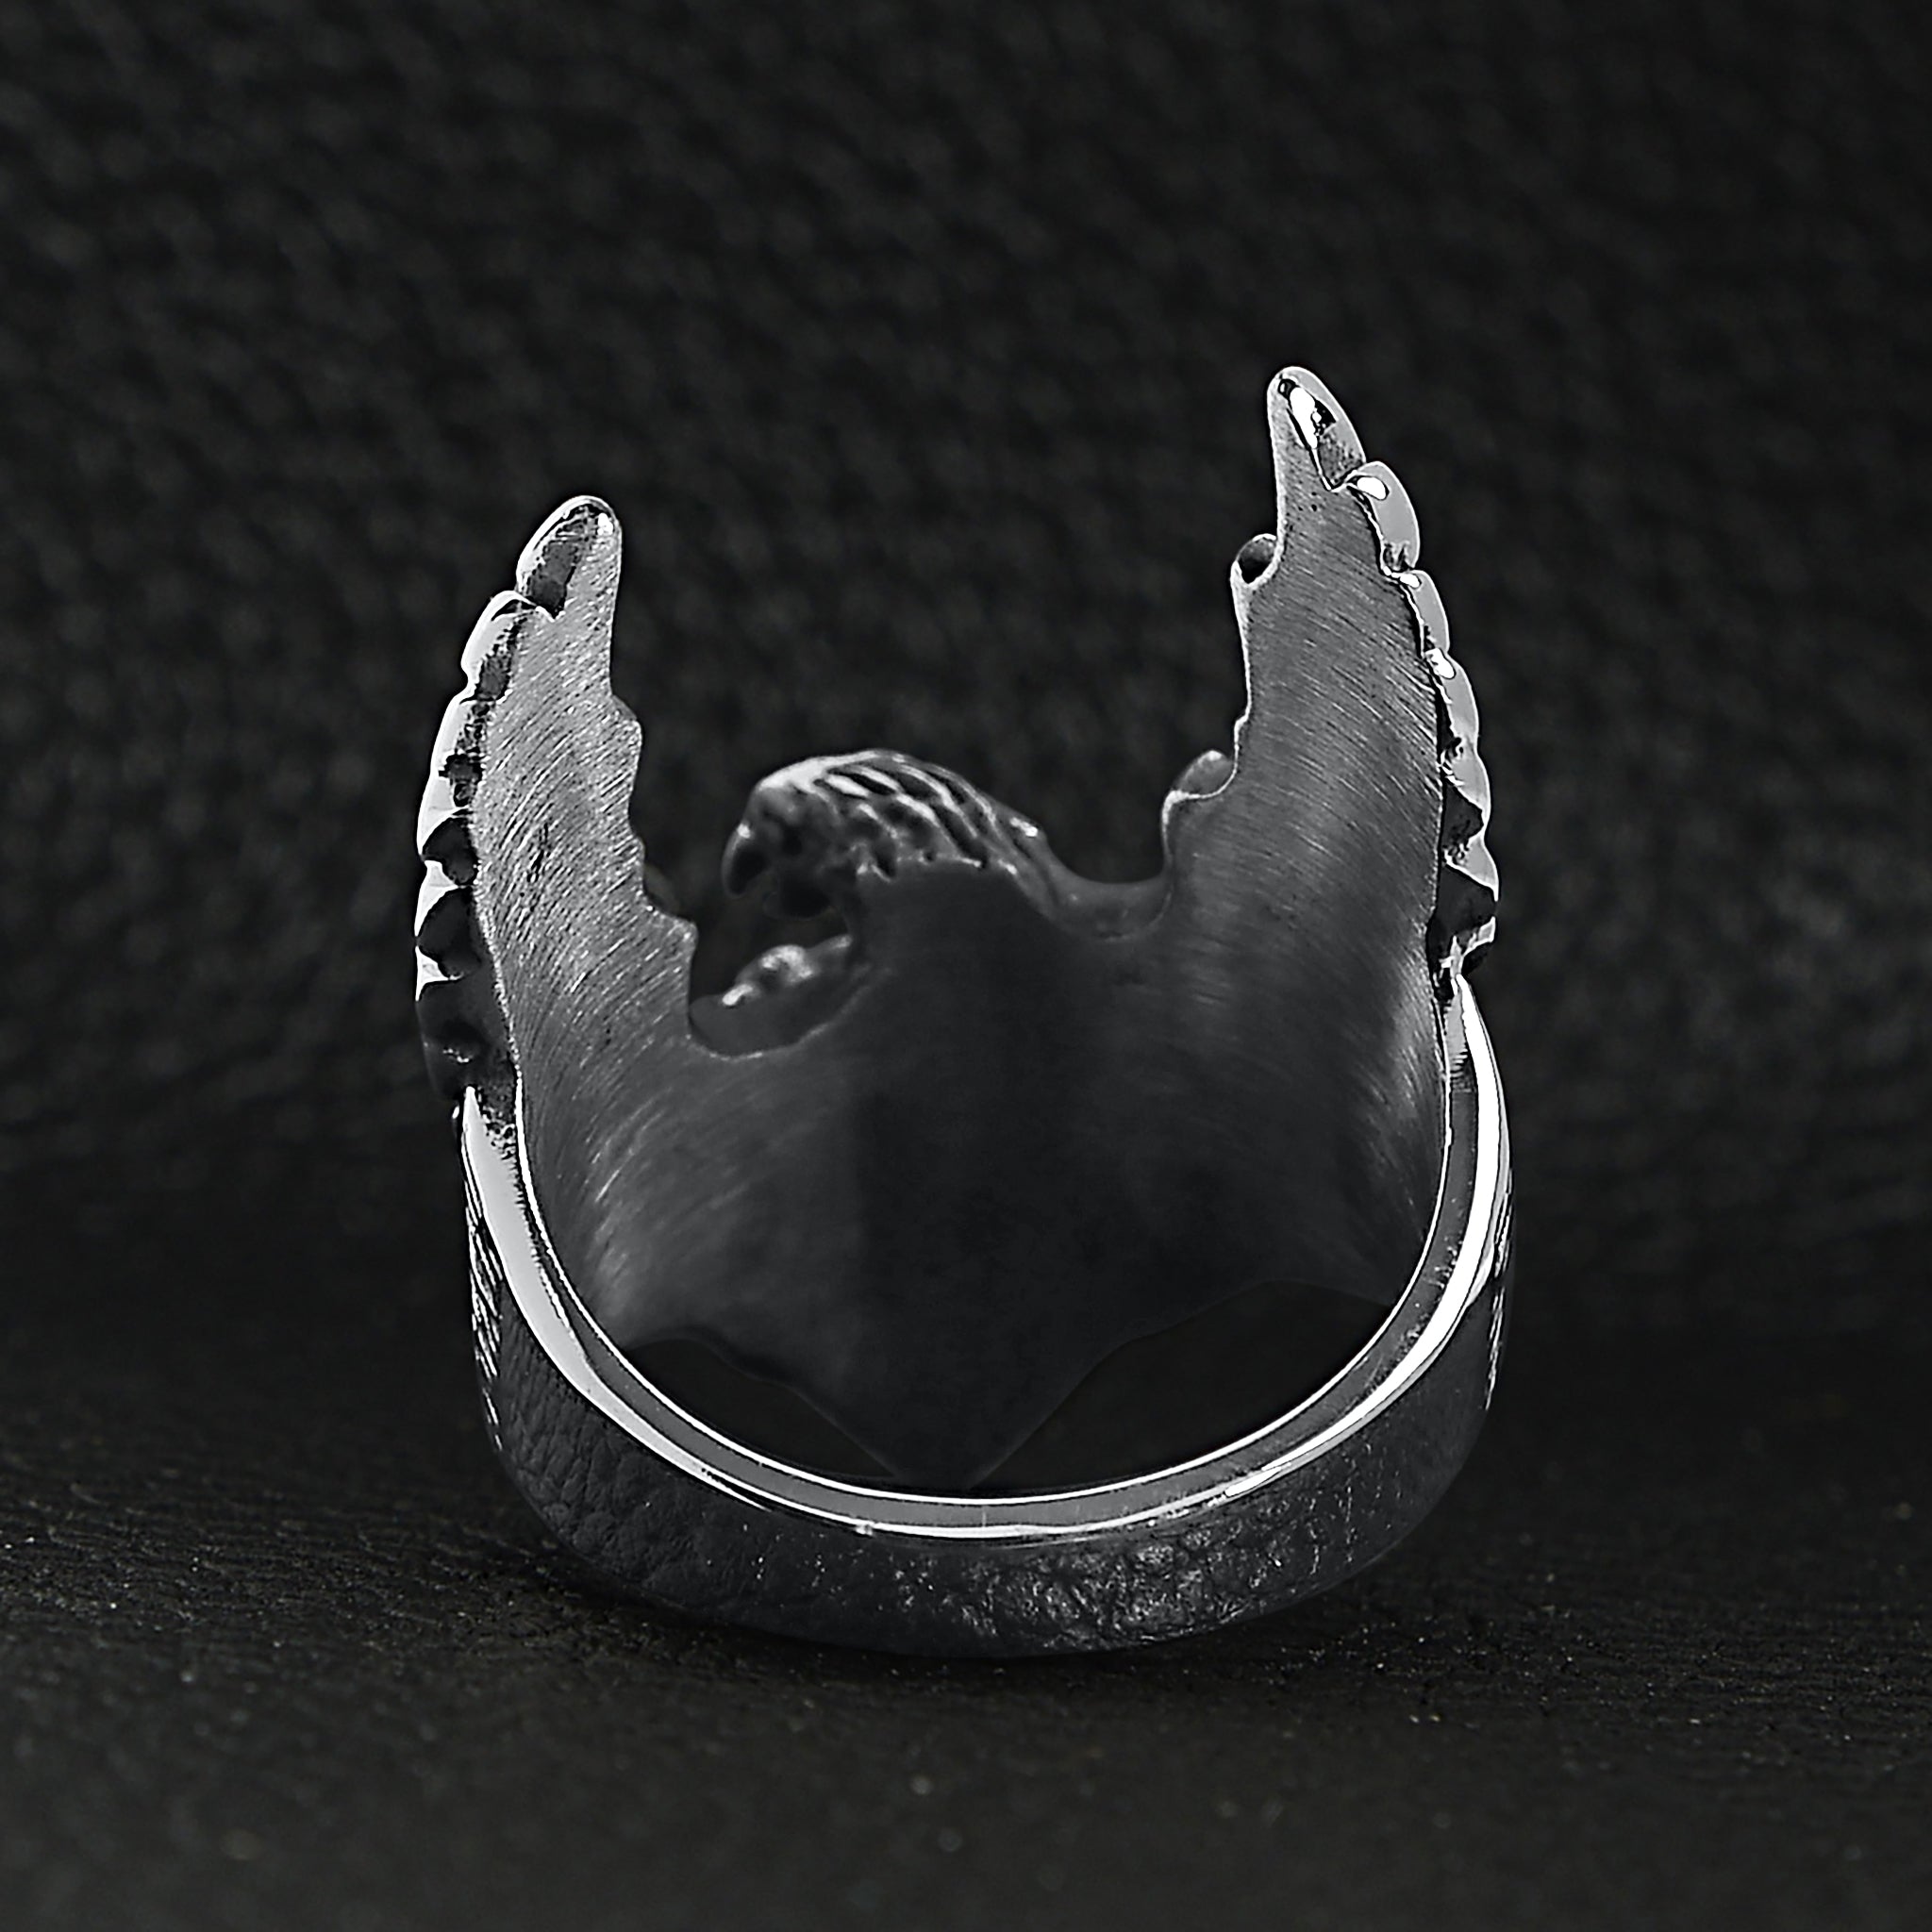 Stainless Steel Flying Eagle Ring - Durable and Hypoallergenic Jewelry for Men - Jewelry & Watches - Bijou Her -  -  - 